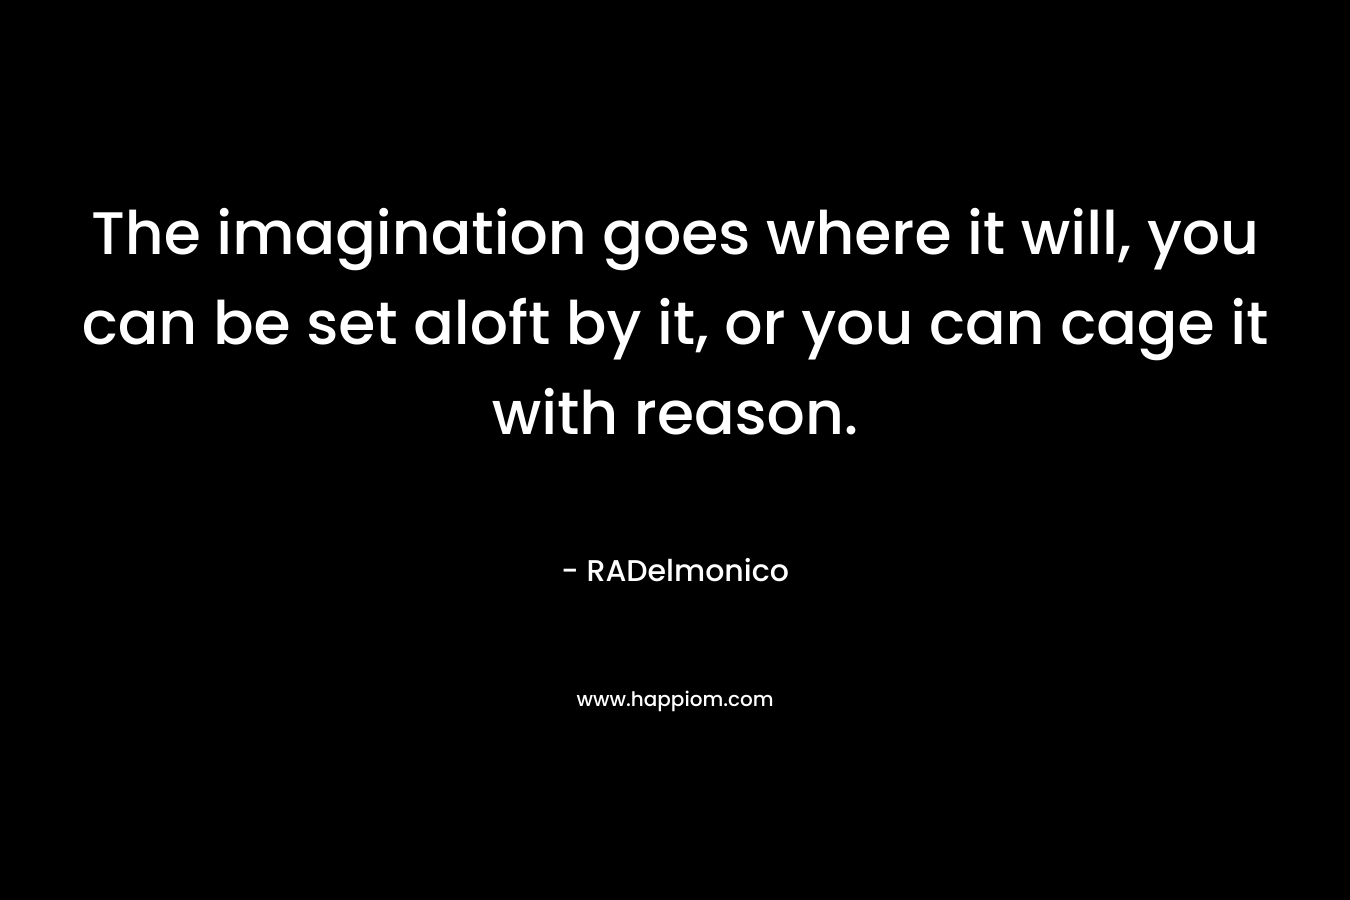 The imagination goes where it will, you can be set aloft by it, or you can cage it with reason.